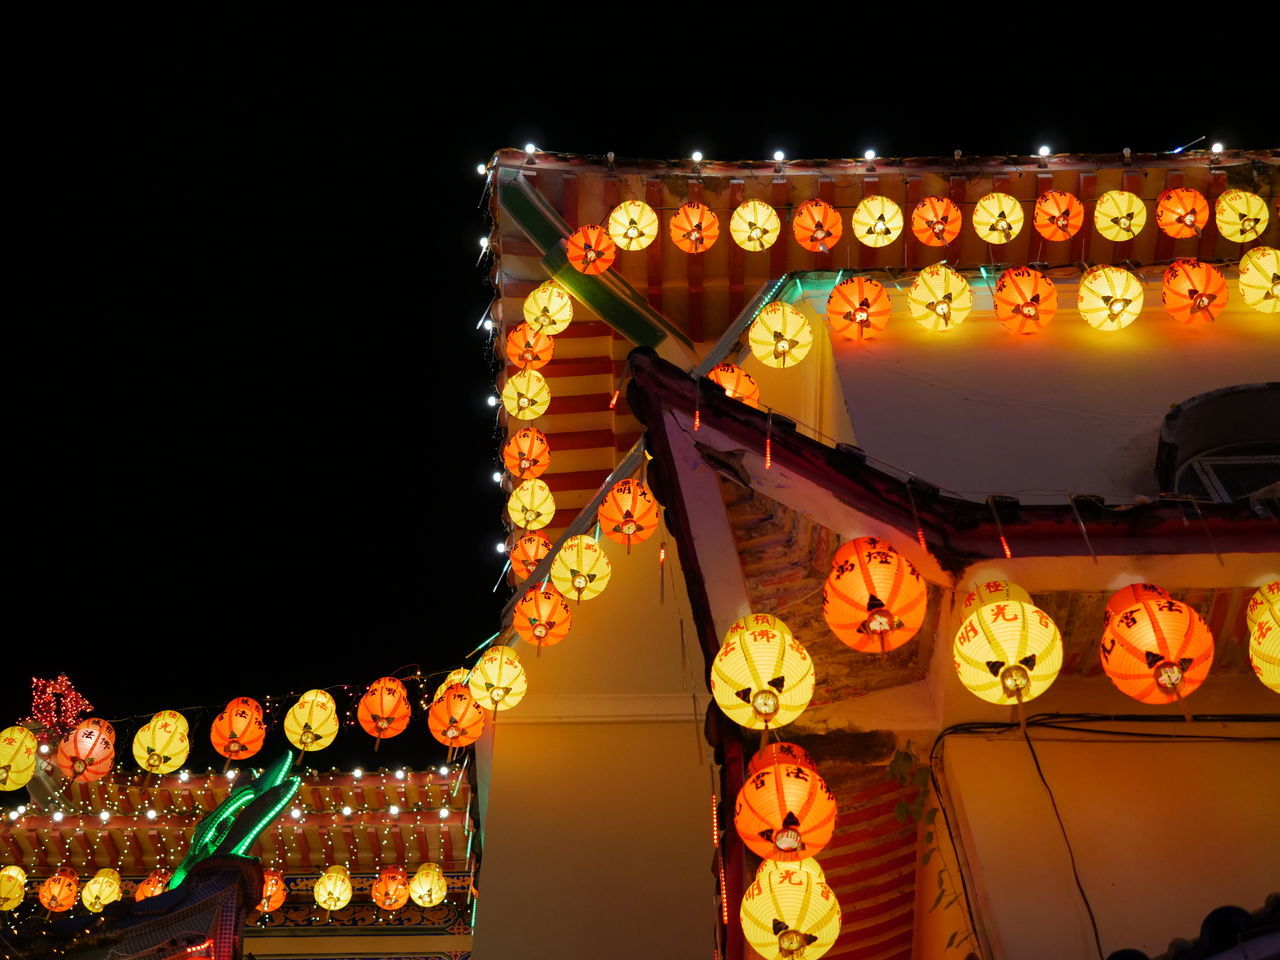 illuminated, night, lighting equipment, celebration, lantern, chinese new year, chinese lantern, decoration, no people, tradition, chinese lantern festival, architecture, traditional festival, festival, event, holiday, hanging, low angle view, arts culture and entertainment, multi colored